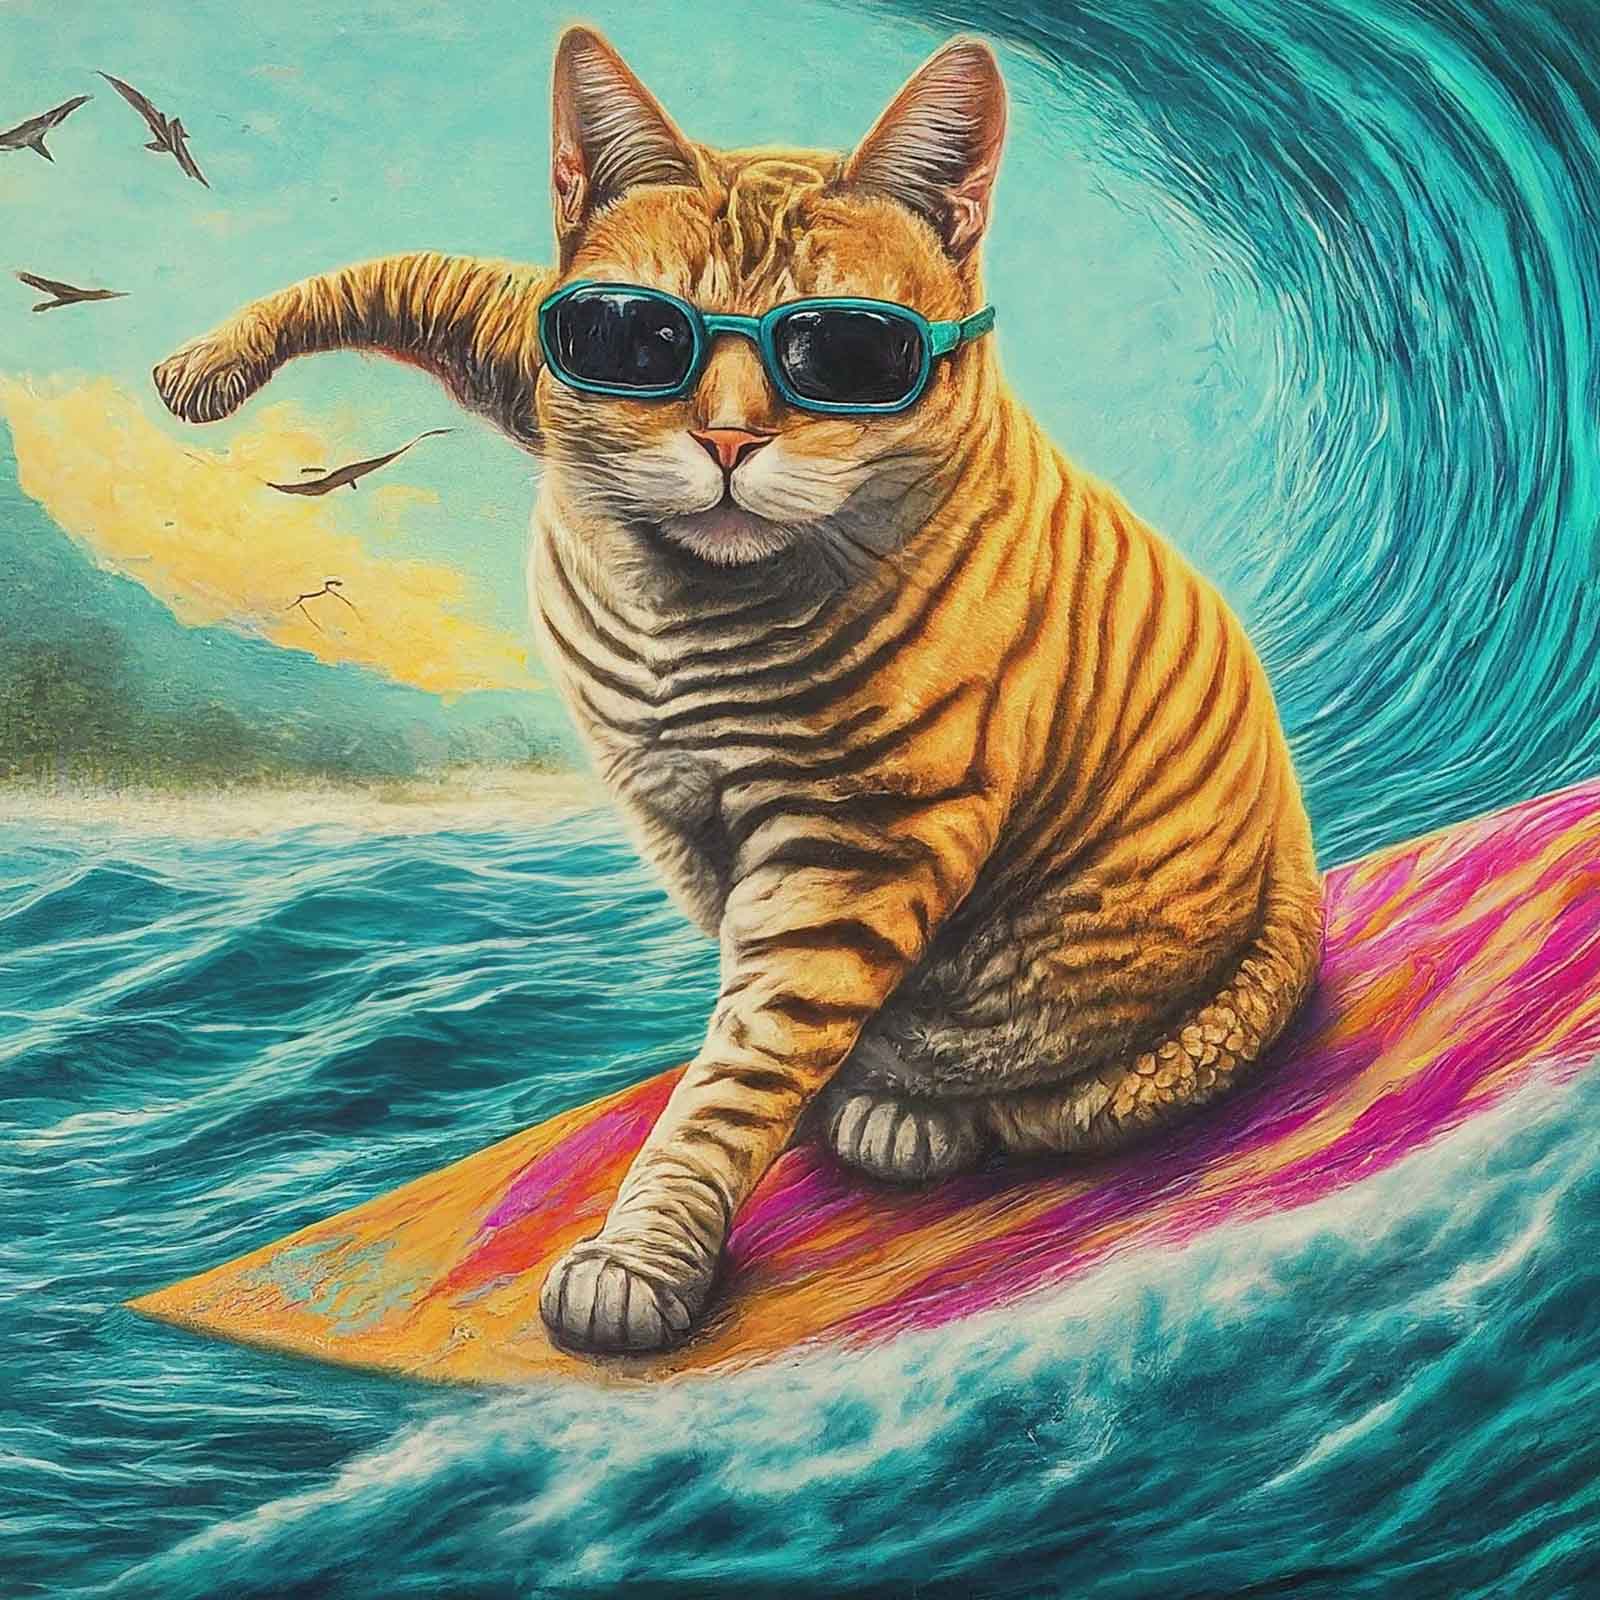 A Painting Of A Cat Riding A Wave On A Surfboard, Showcasing A Cat Surfer.